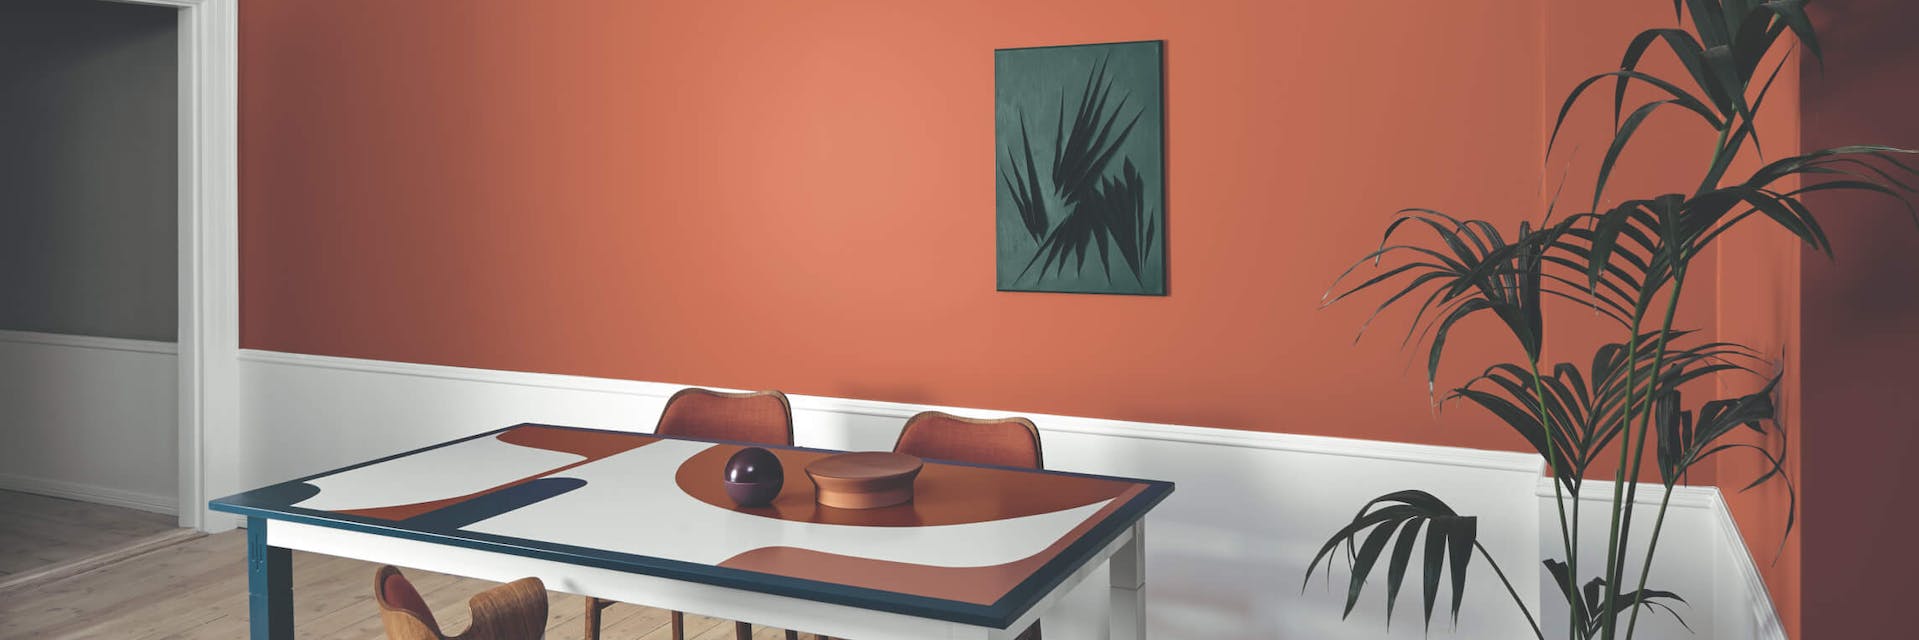 dining room with a vibrant terracotta wall 